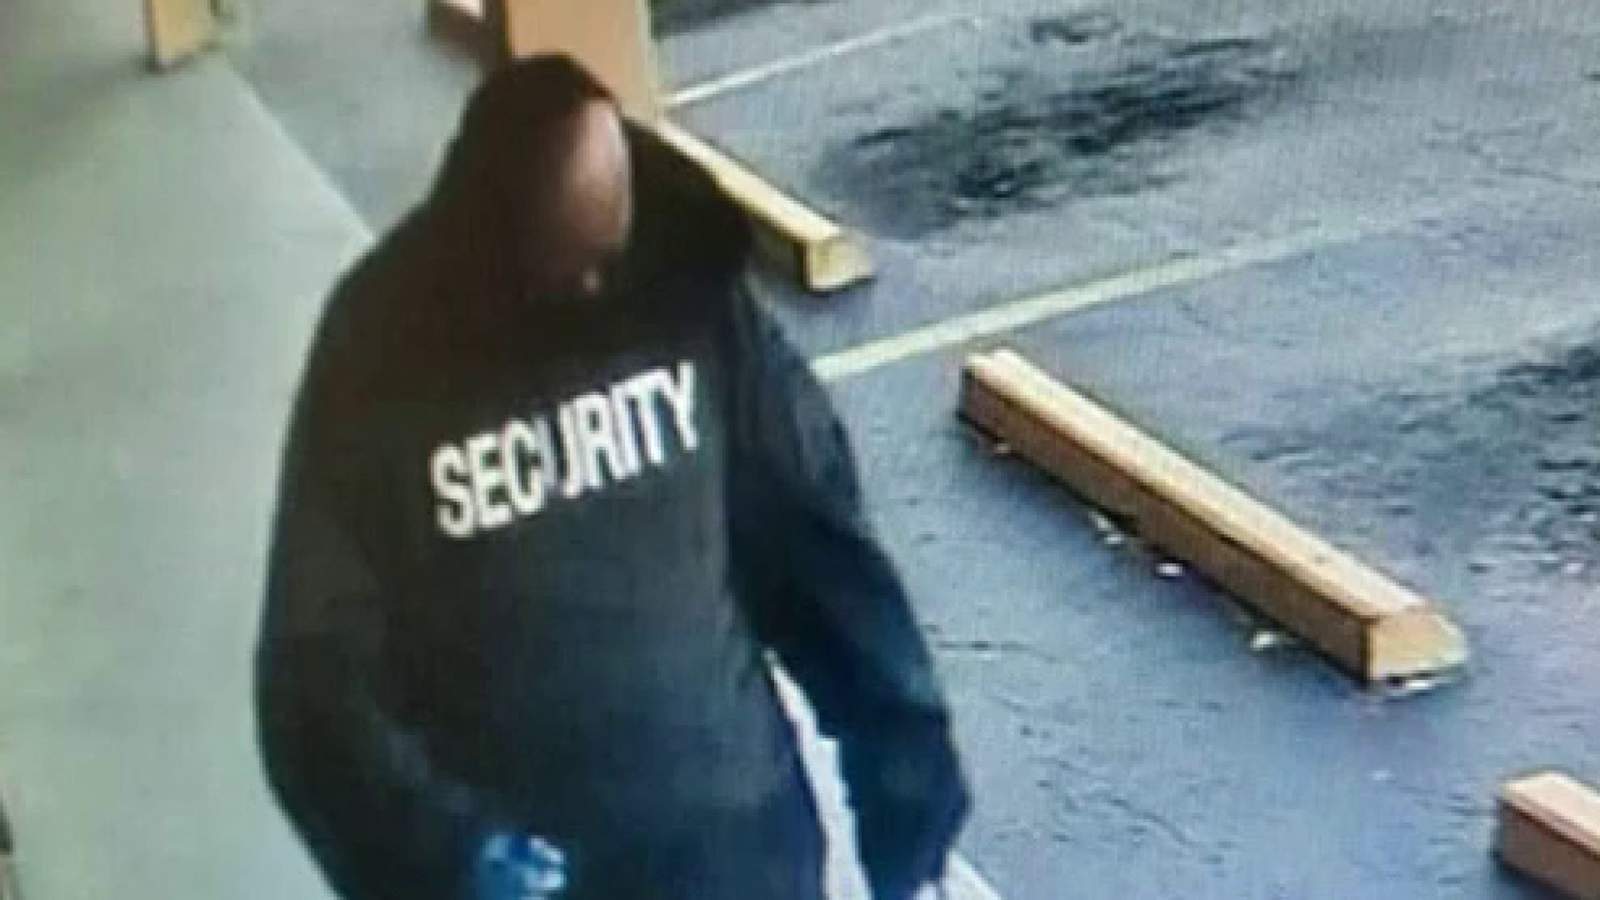 Man who pistol-whipped Tavares store worker while wearing ‘Security’ hoodie arrested, police say